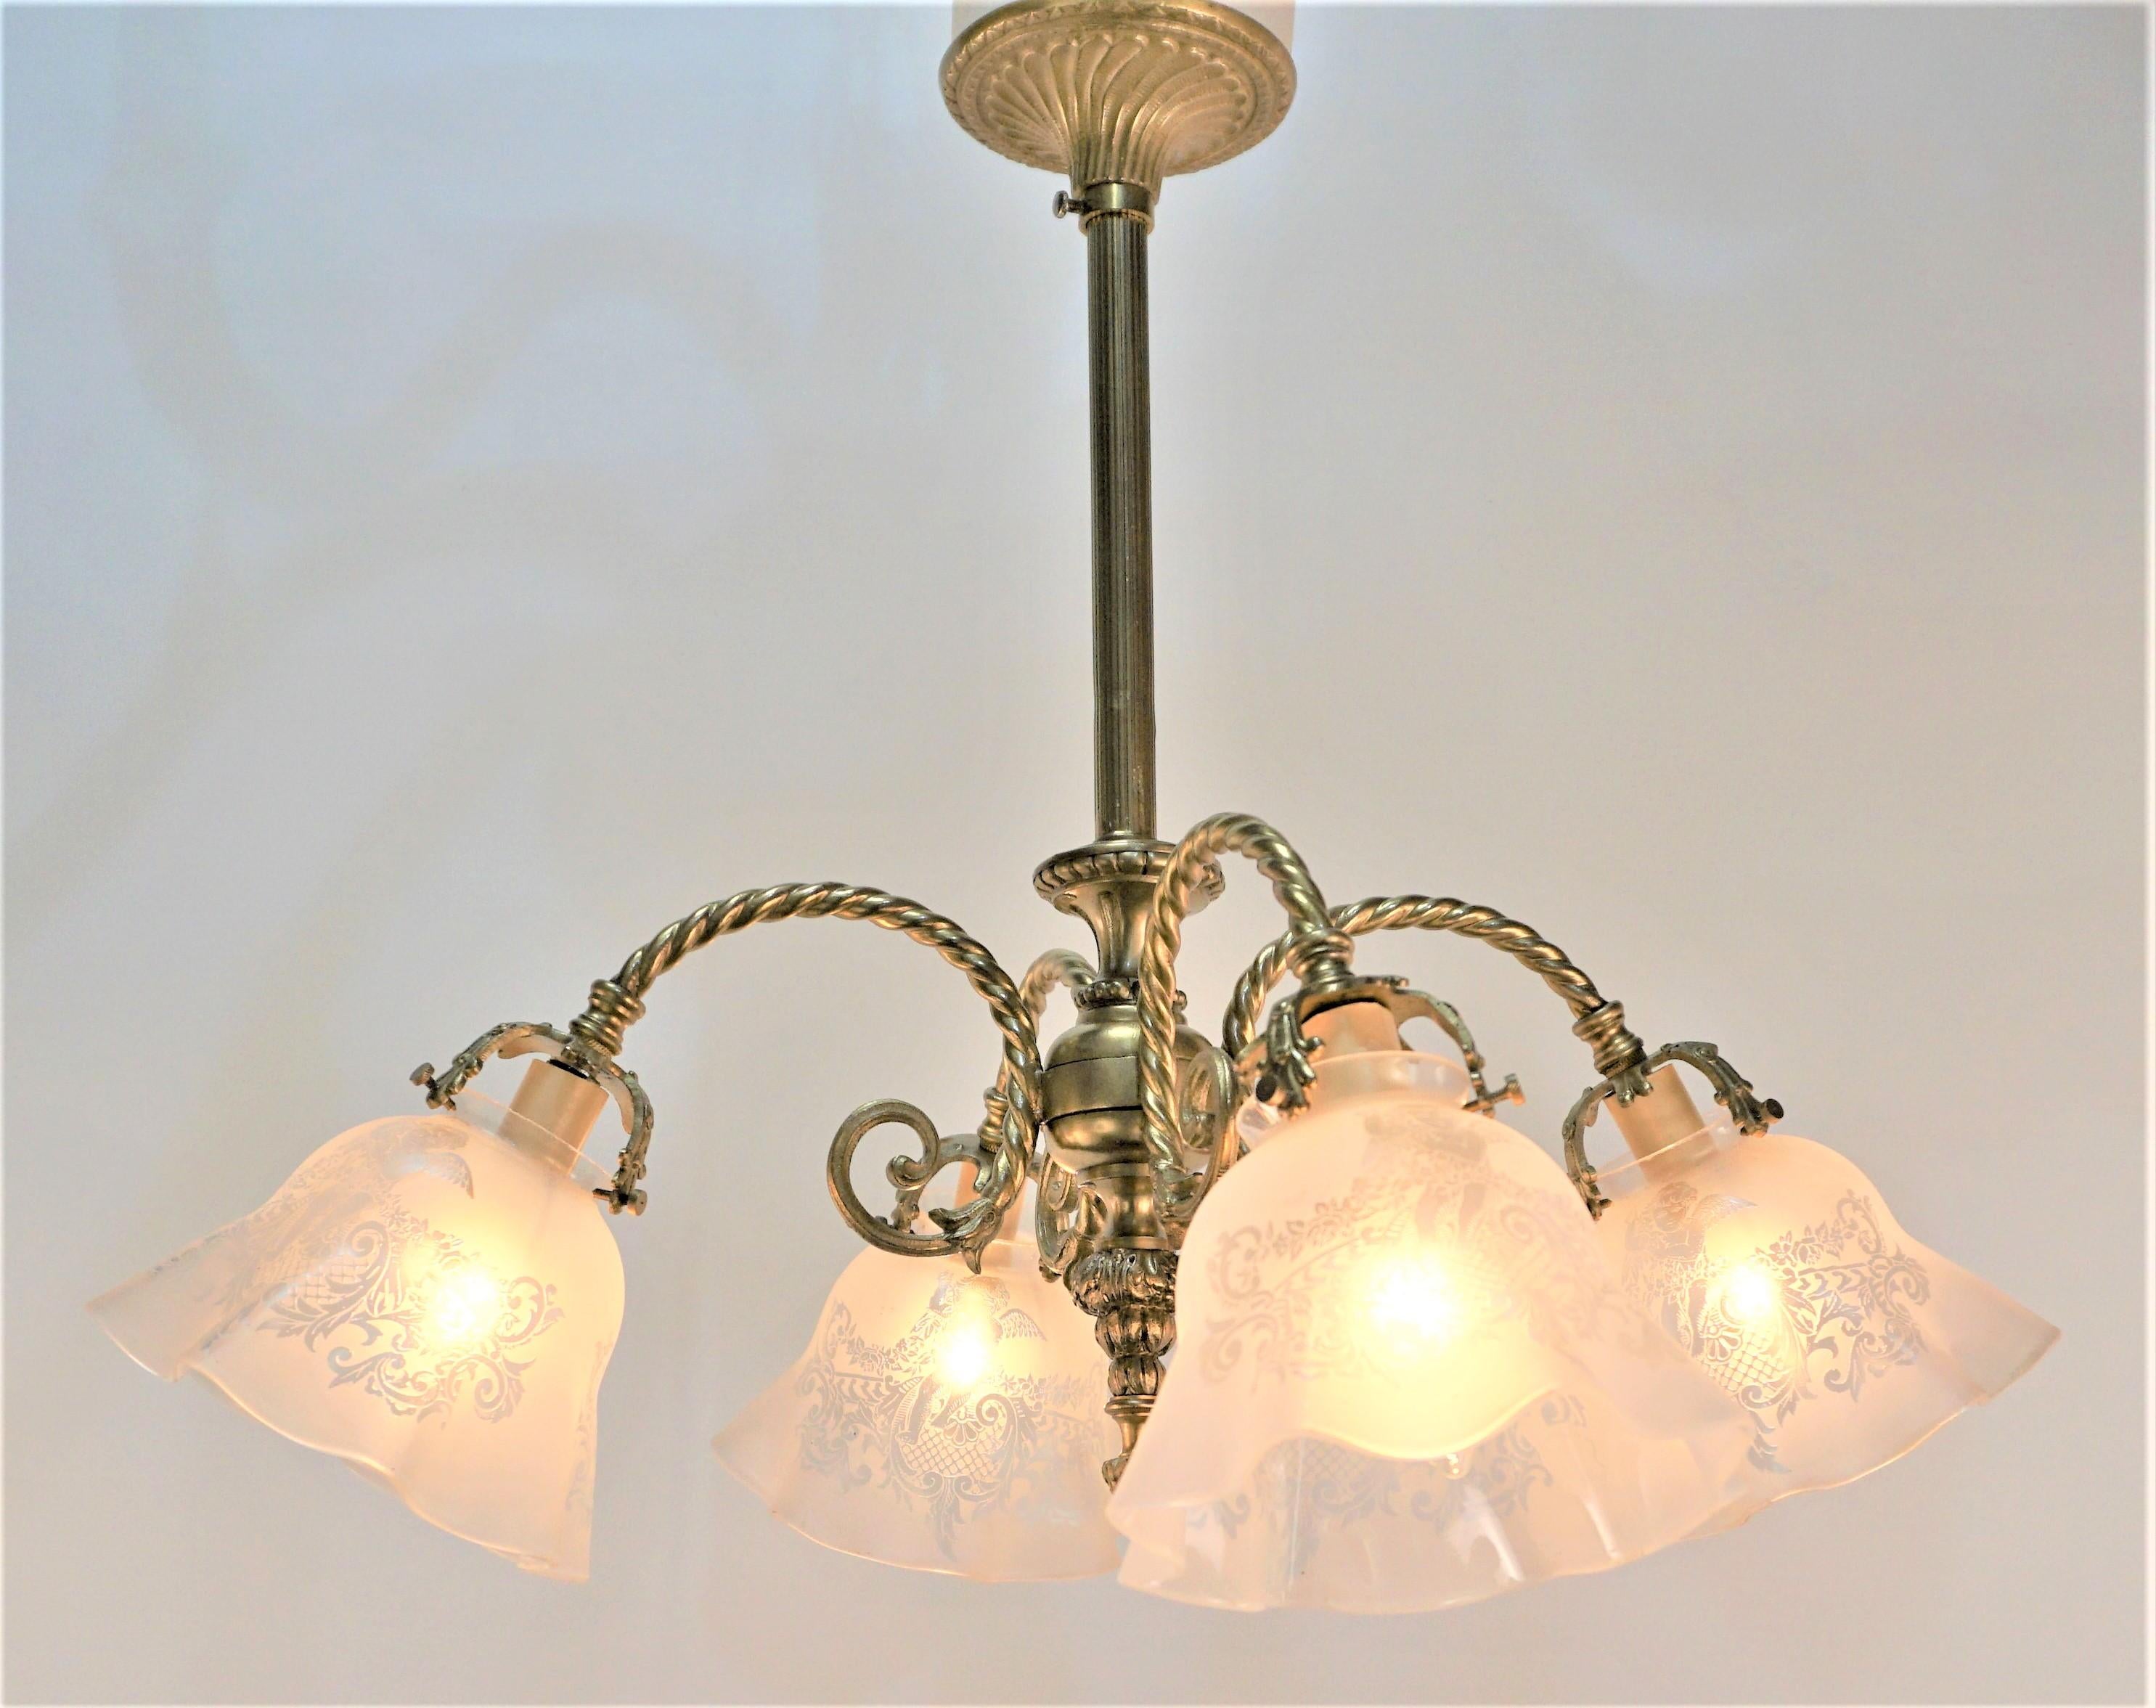 Early electrical four arm bronze chandelier with etched cherub glass shades.
Width 21